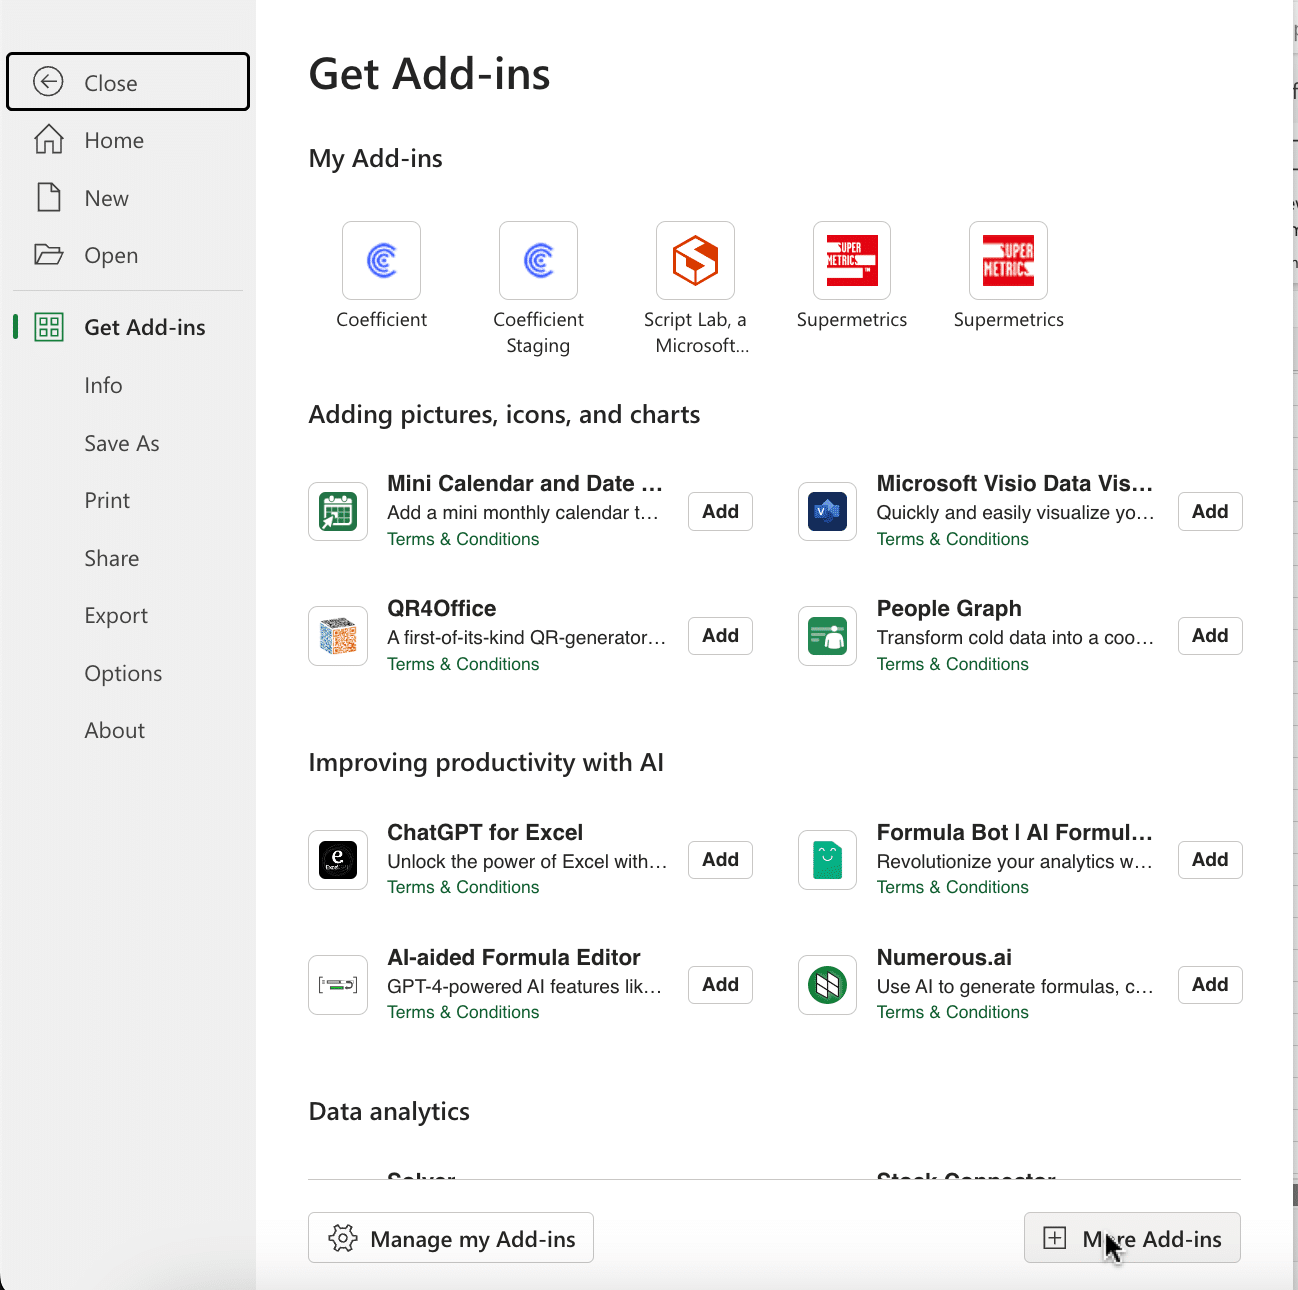 Accessing ‘More Add-Ins’ through the File and Get Add-ins menu in Excel